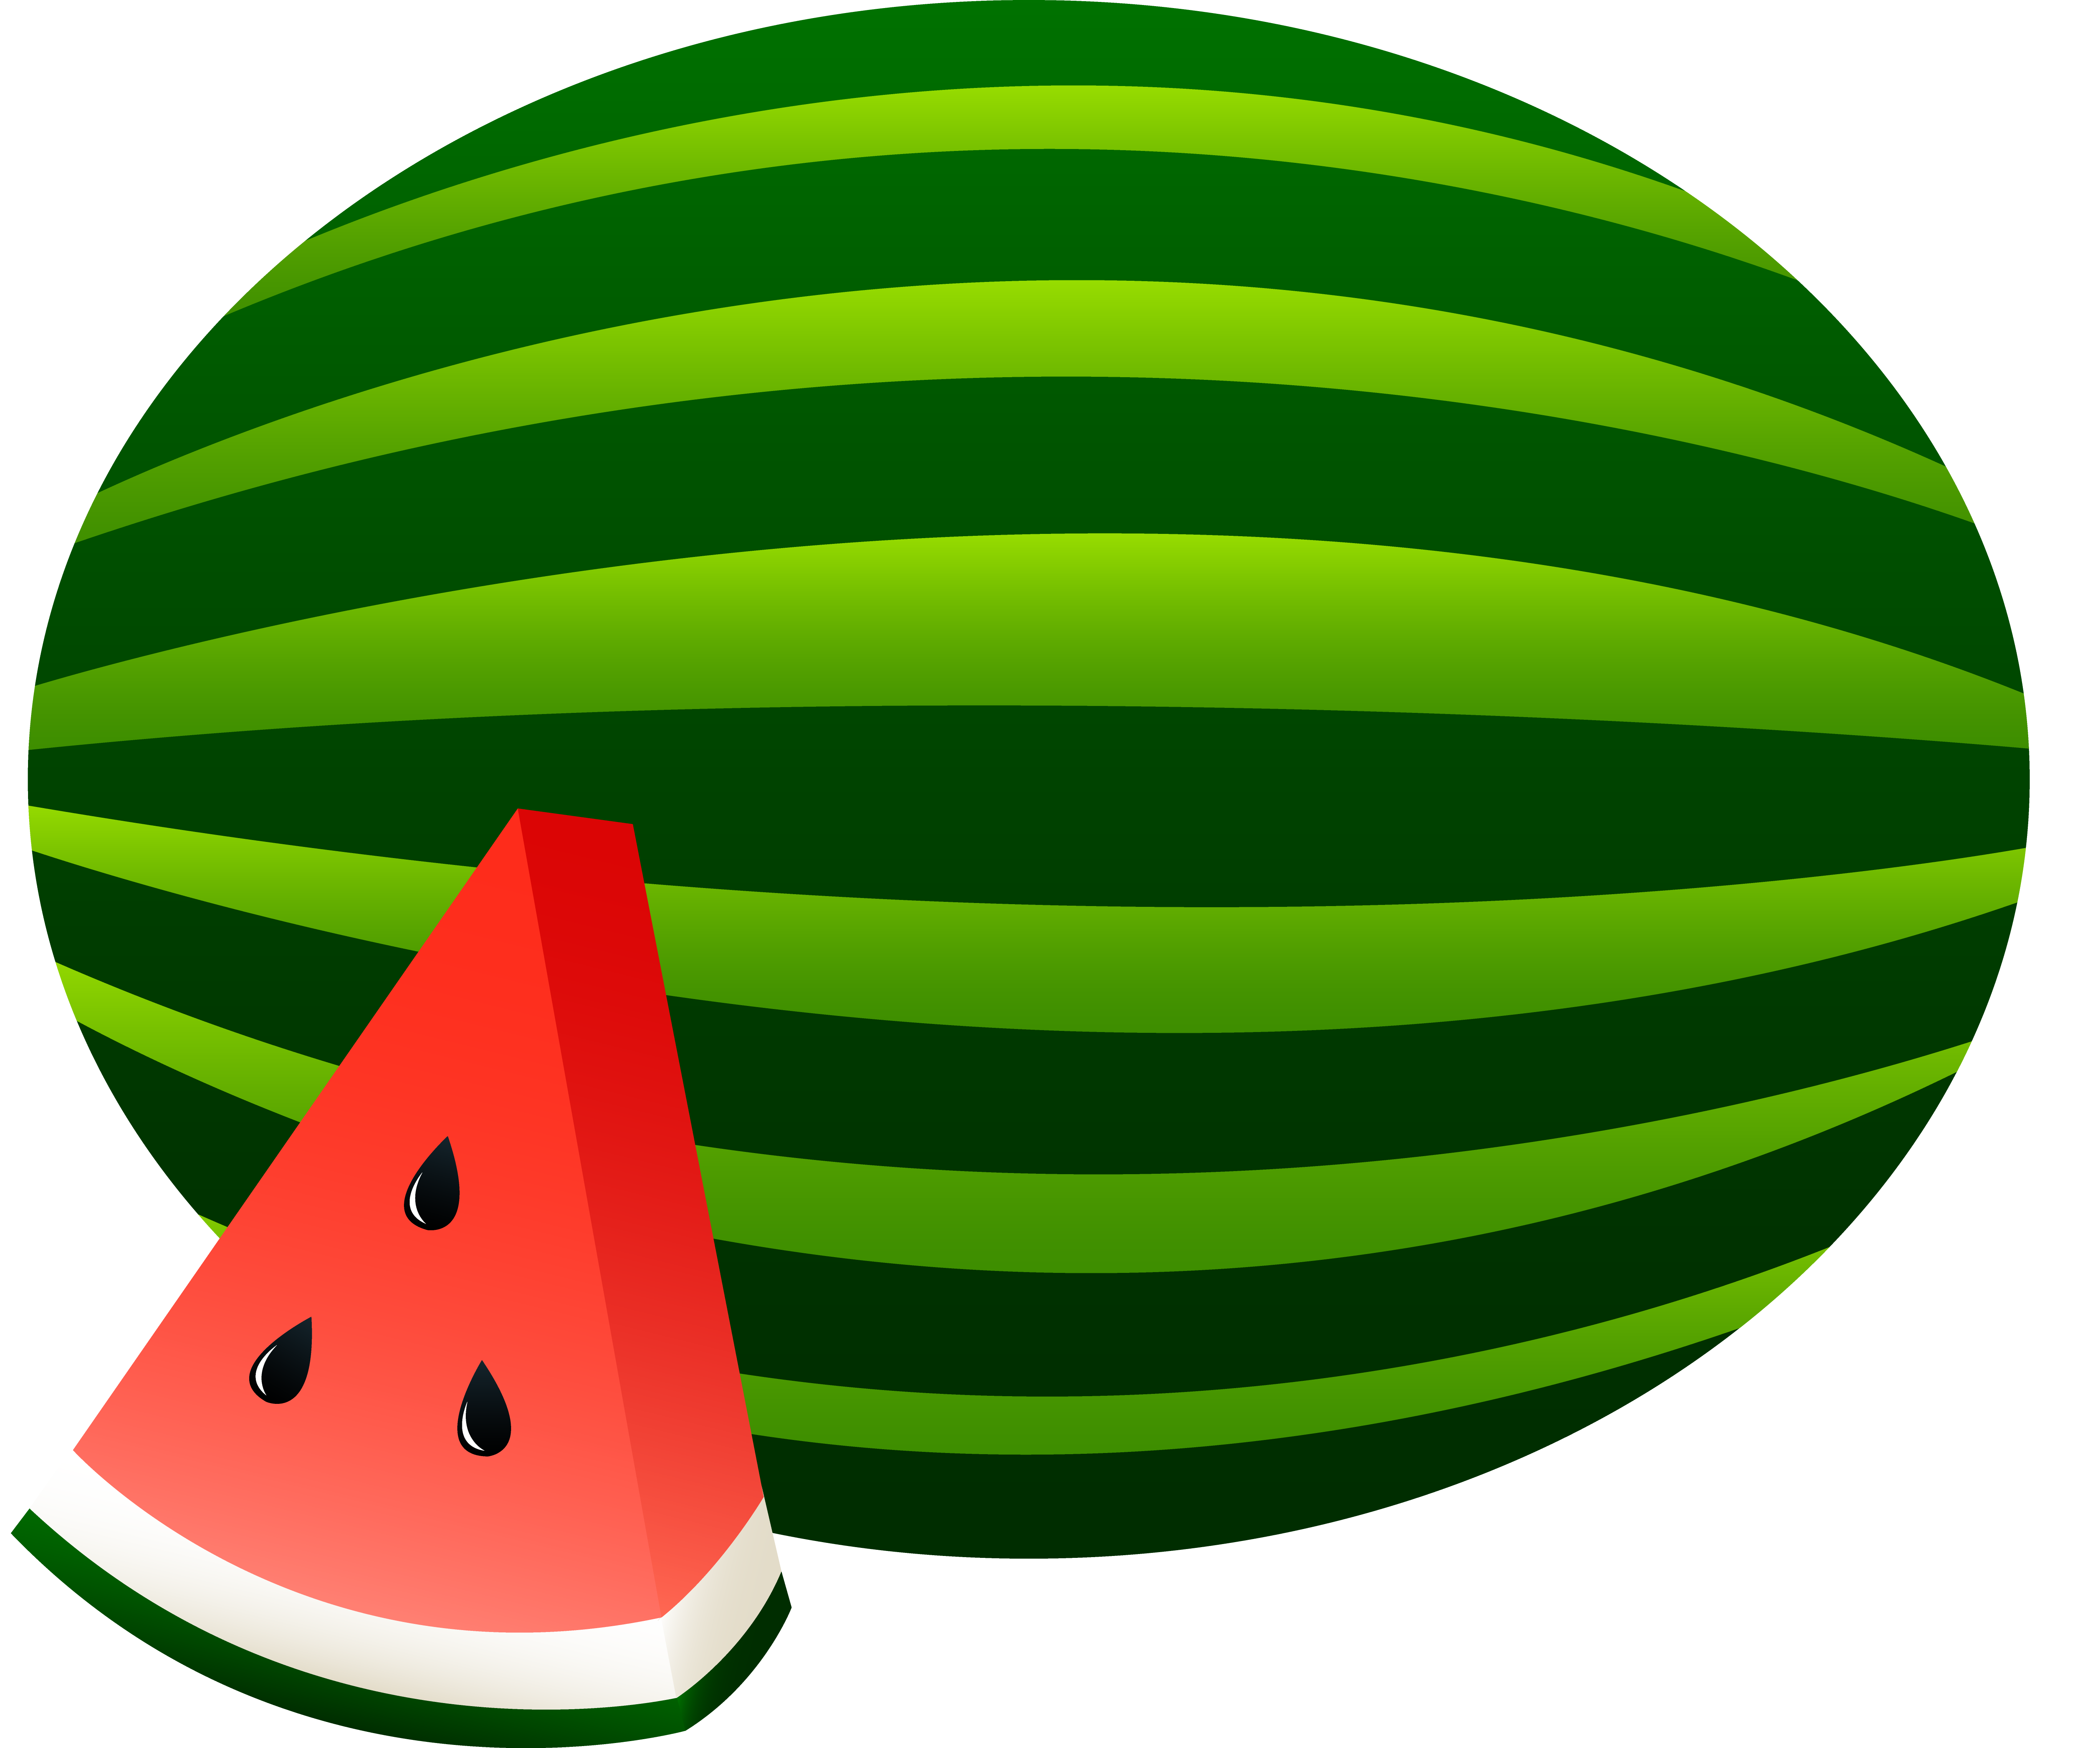 Watermelon Drawing - ClipArt Best